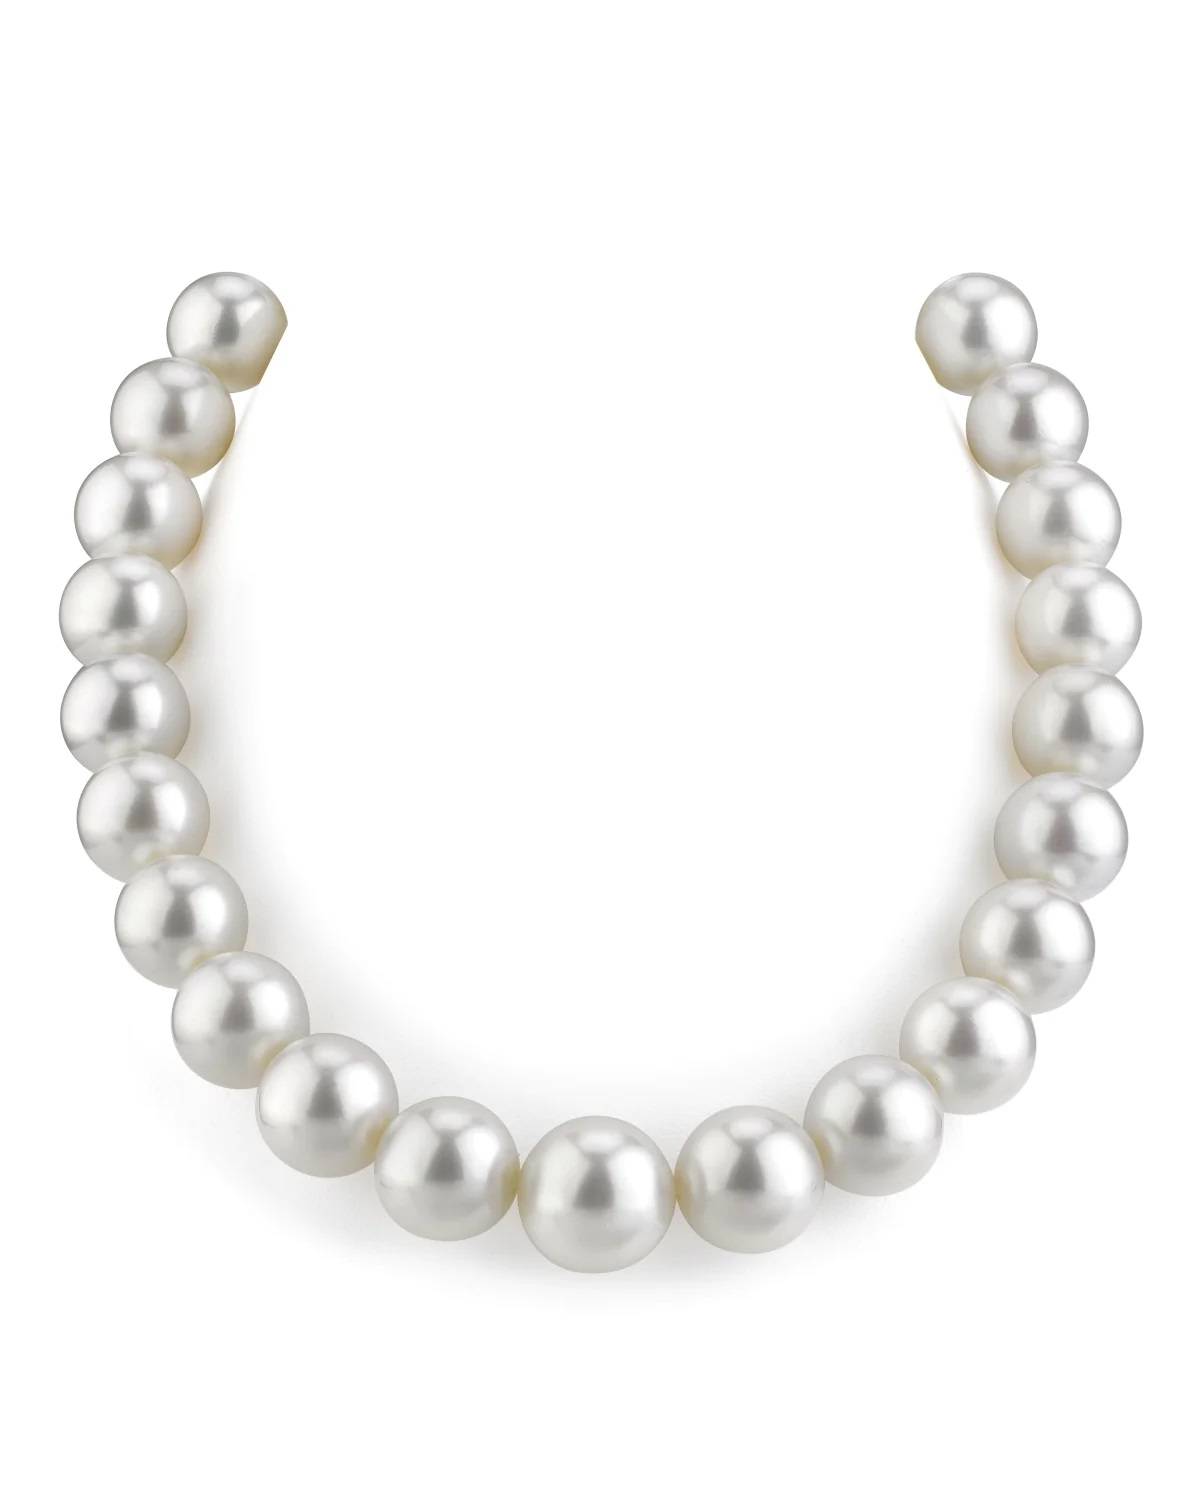 White South Sea Pearl Necklace by Pearls of Joy